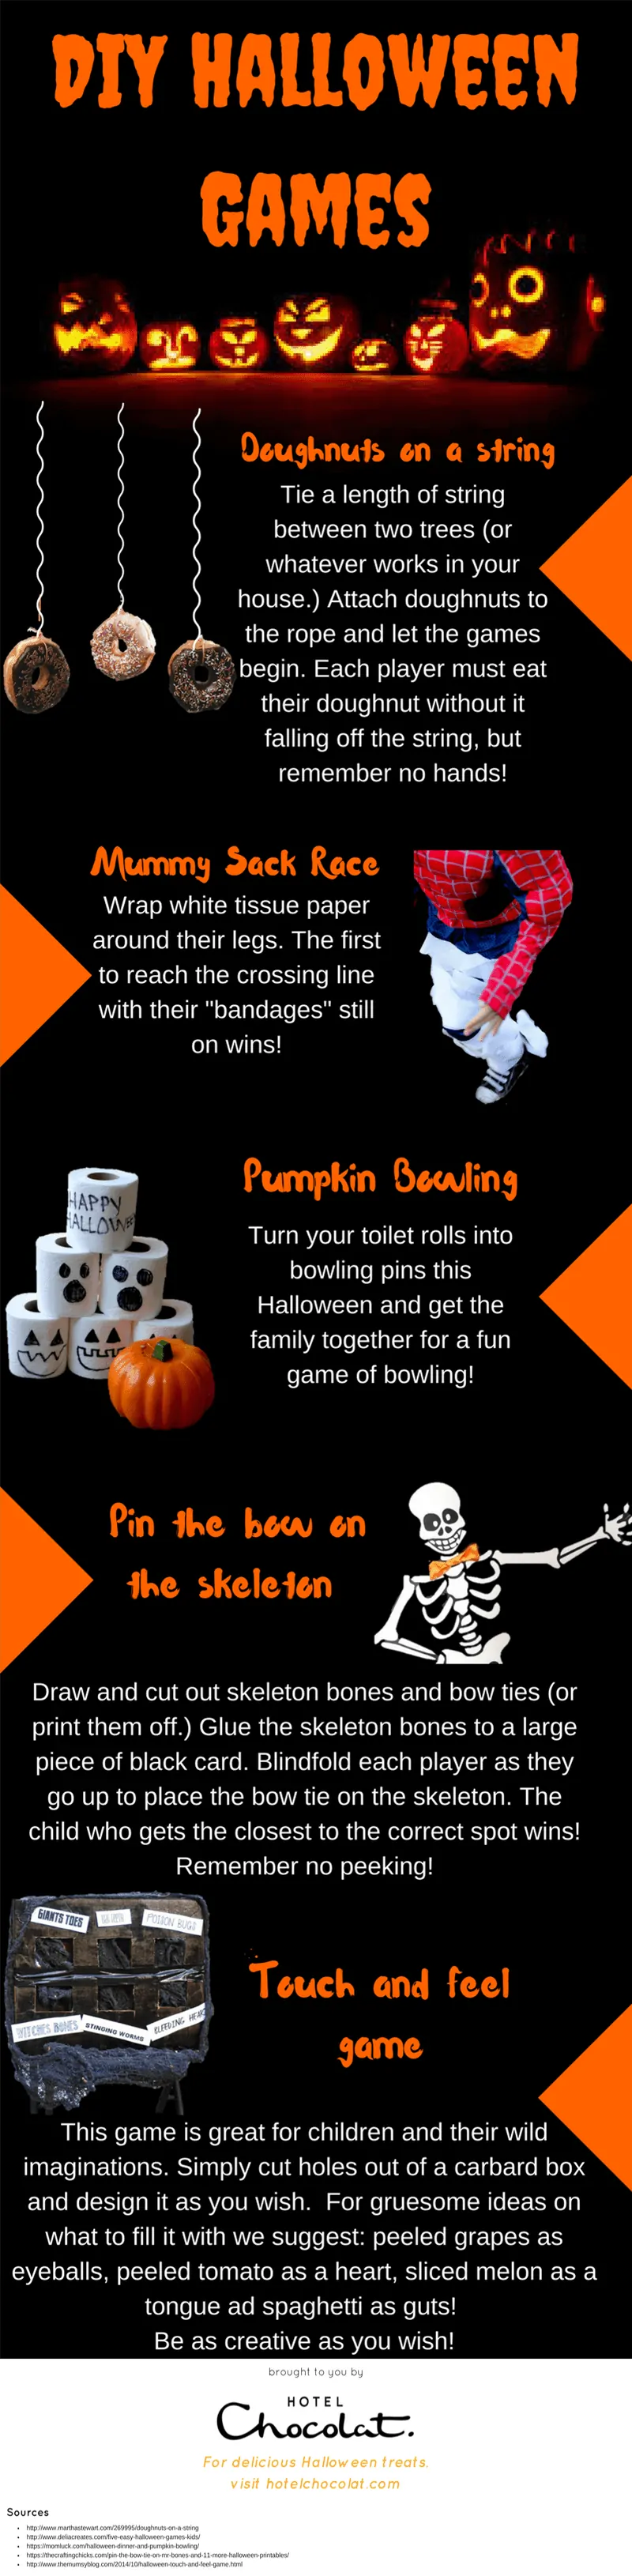 Spooktacular Tips for Throwing a Boo-tiful Halloween Bash for Teens 5. Costume Contest and Makeup Tips